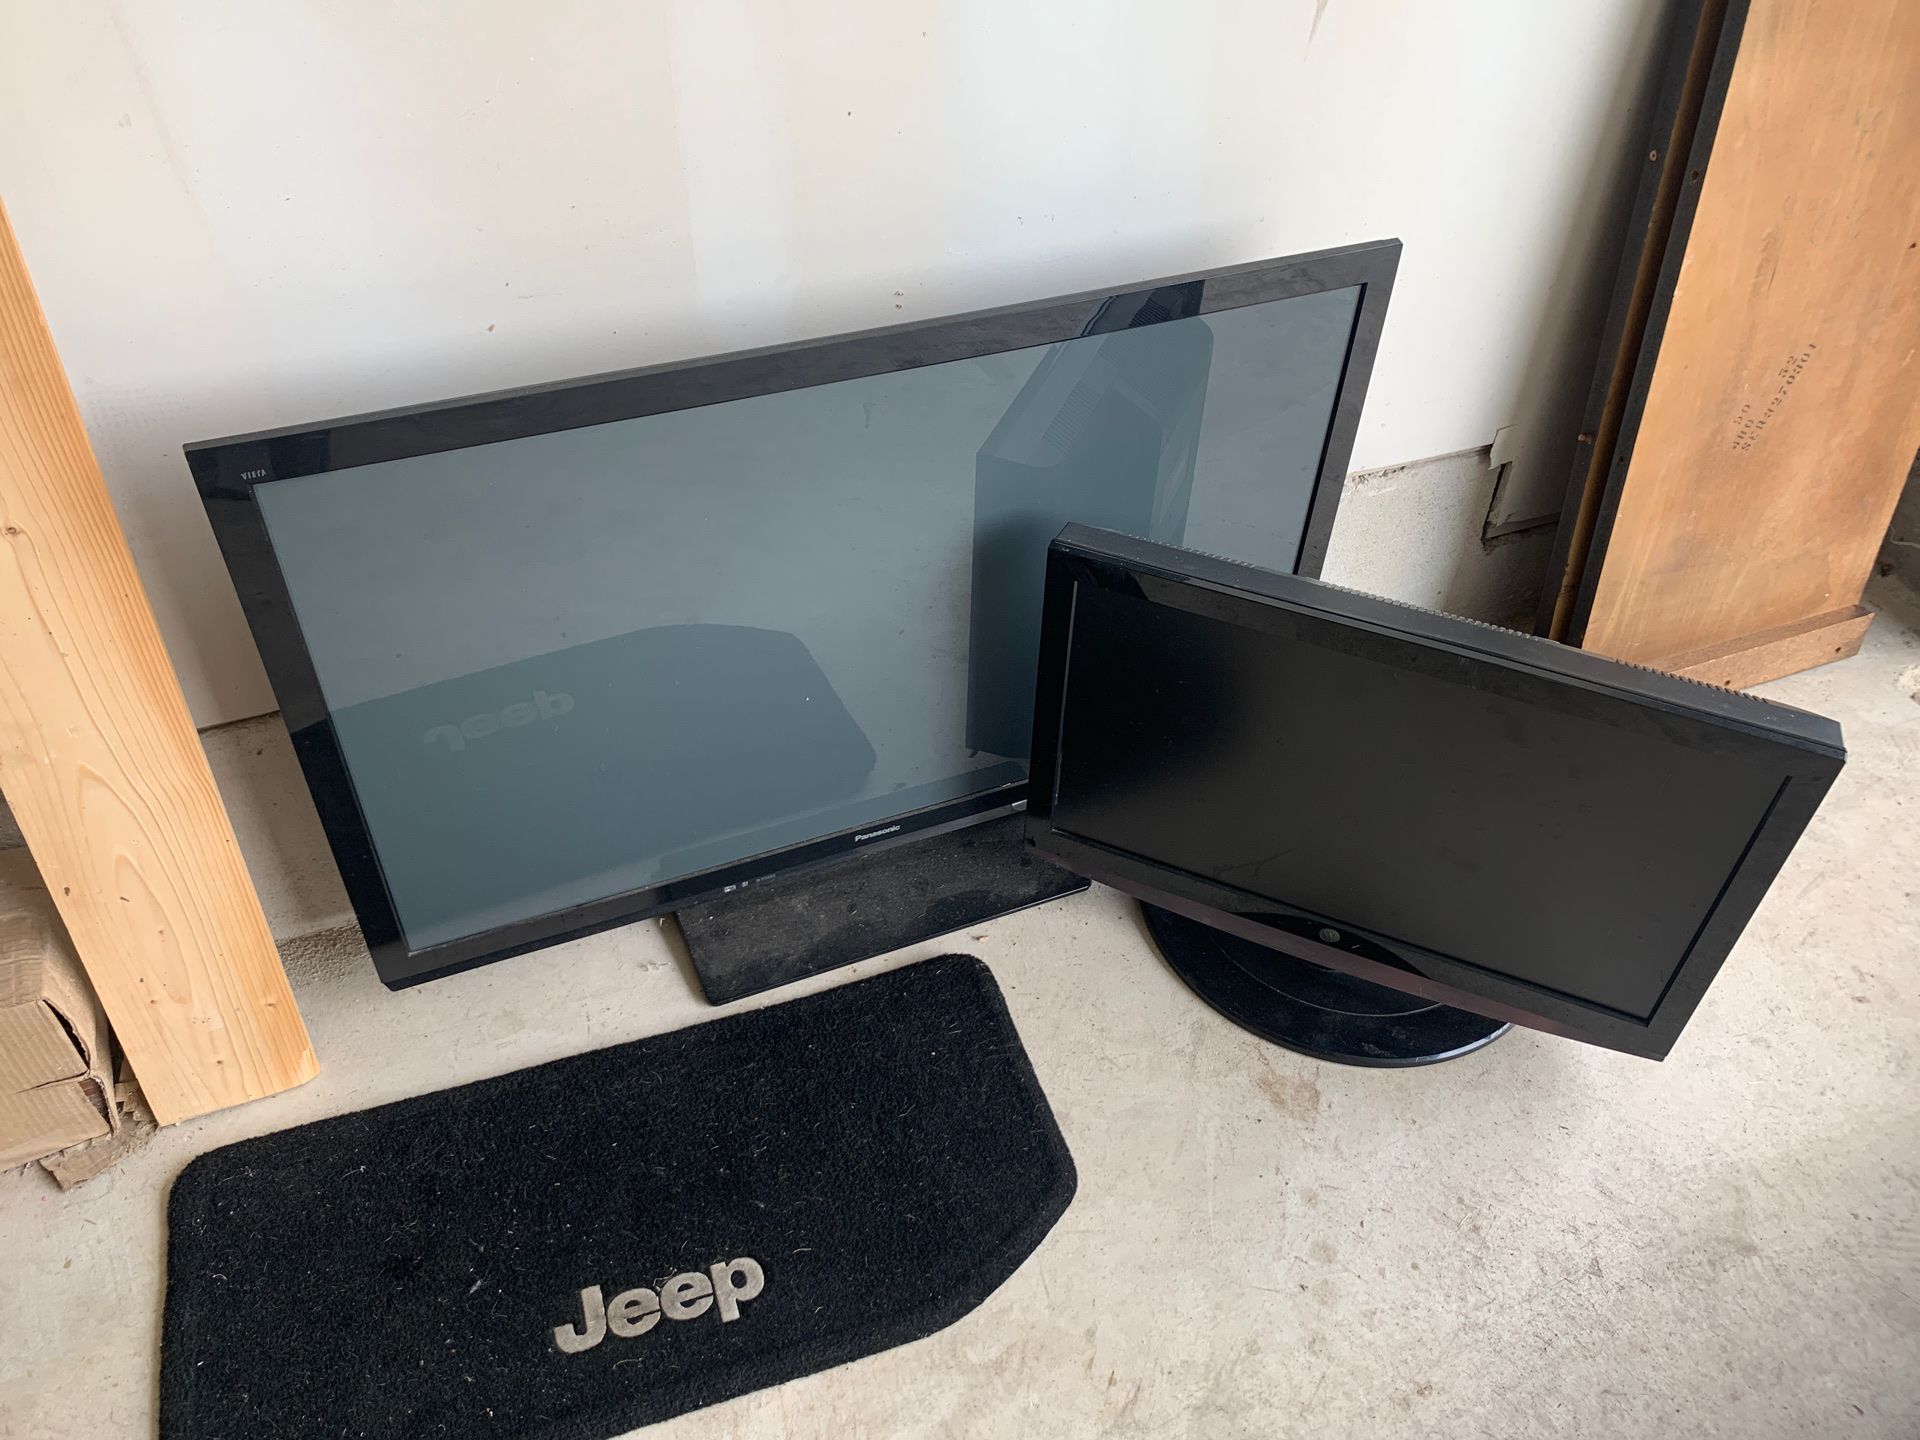 48” and 27” TV for free